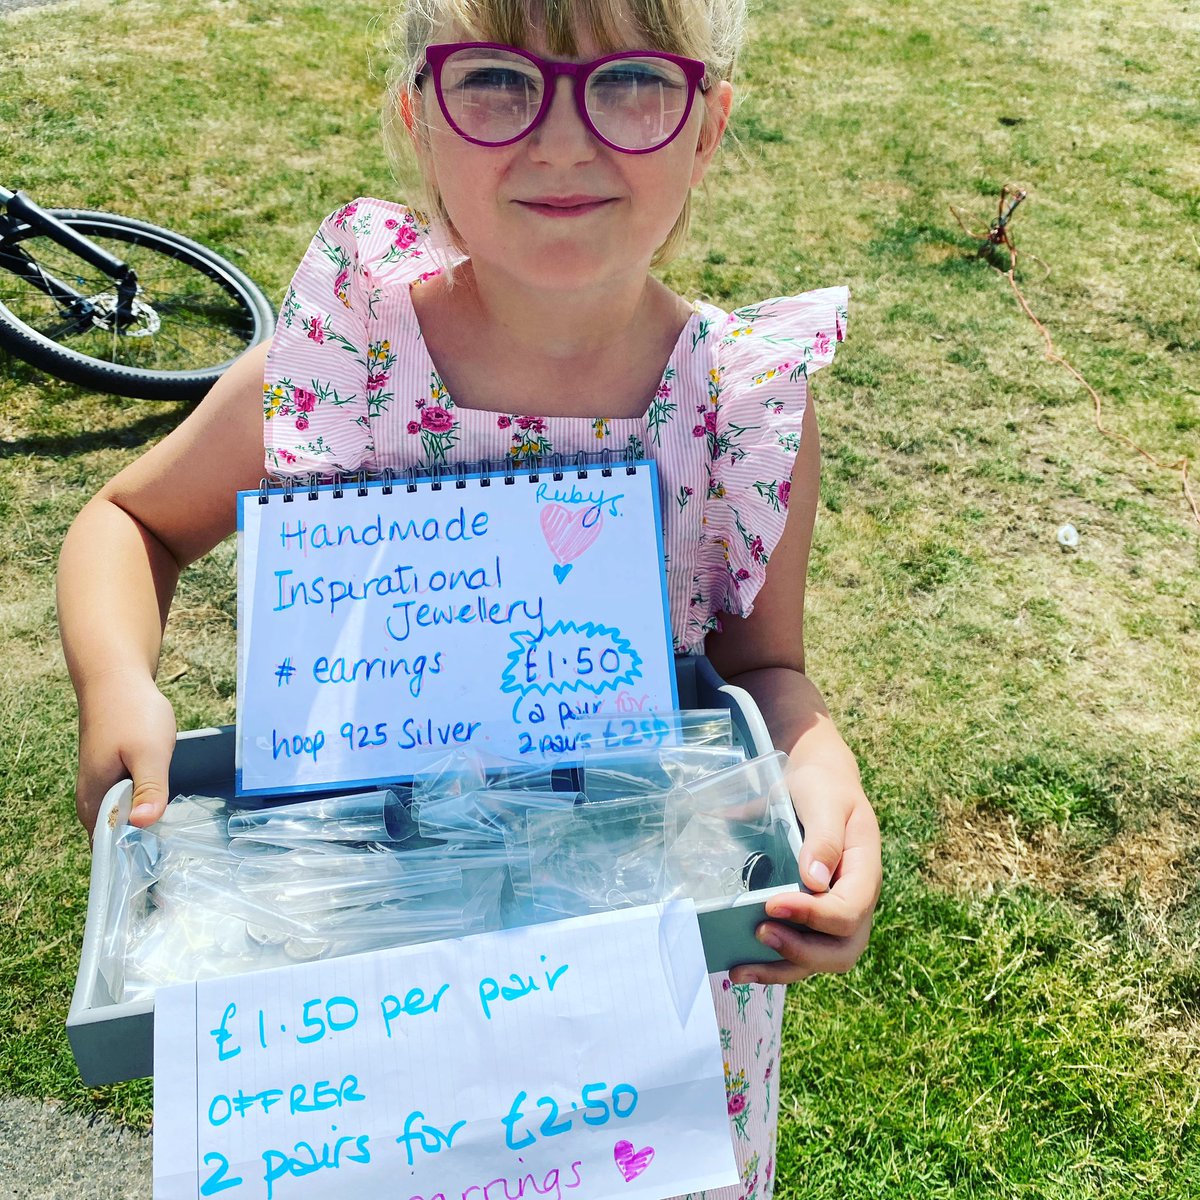 Starting the entrepreneurship journey joint spent the day crafting #inspirationalquote jewellery so made some great #925silverjewellery #earrings and hoping to #sharesomelove and make some #pocketmoney young #WomanInBusiness age 6 and a half 🤣